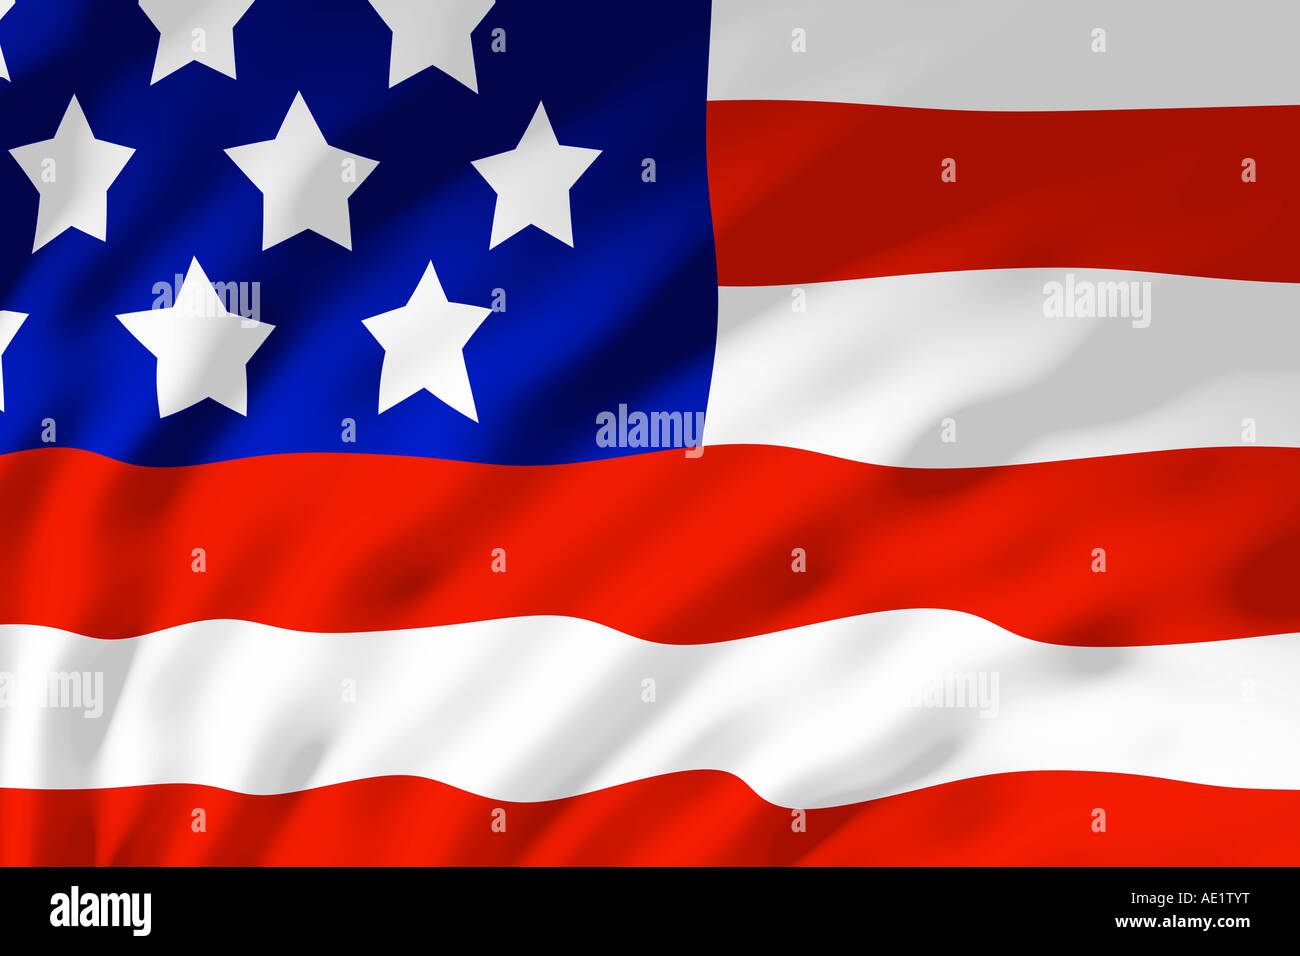 The American flag shown with ripples caused by the wind Stock Photo